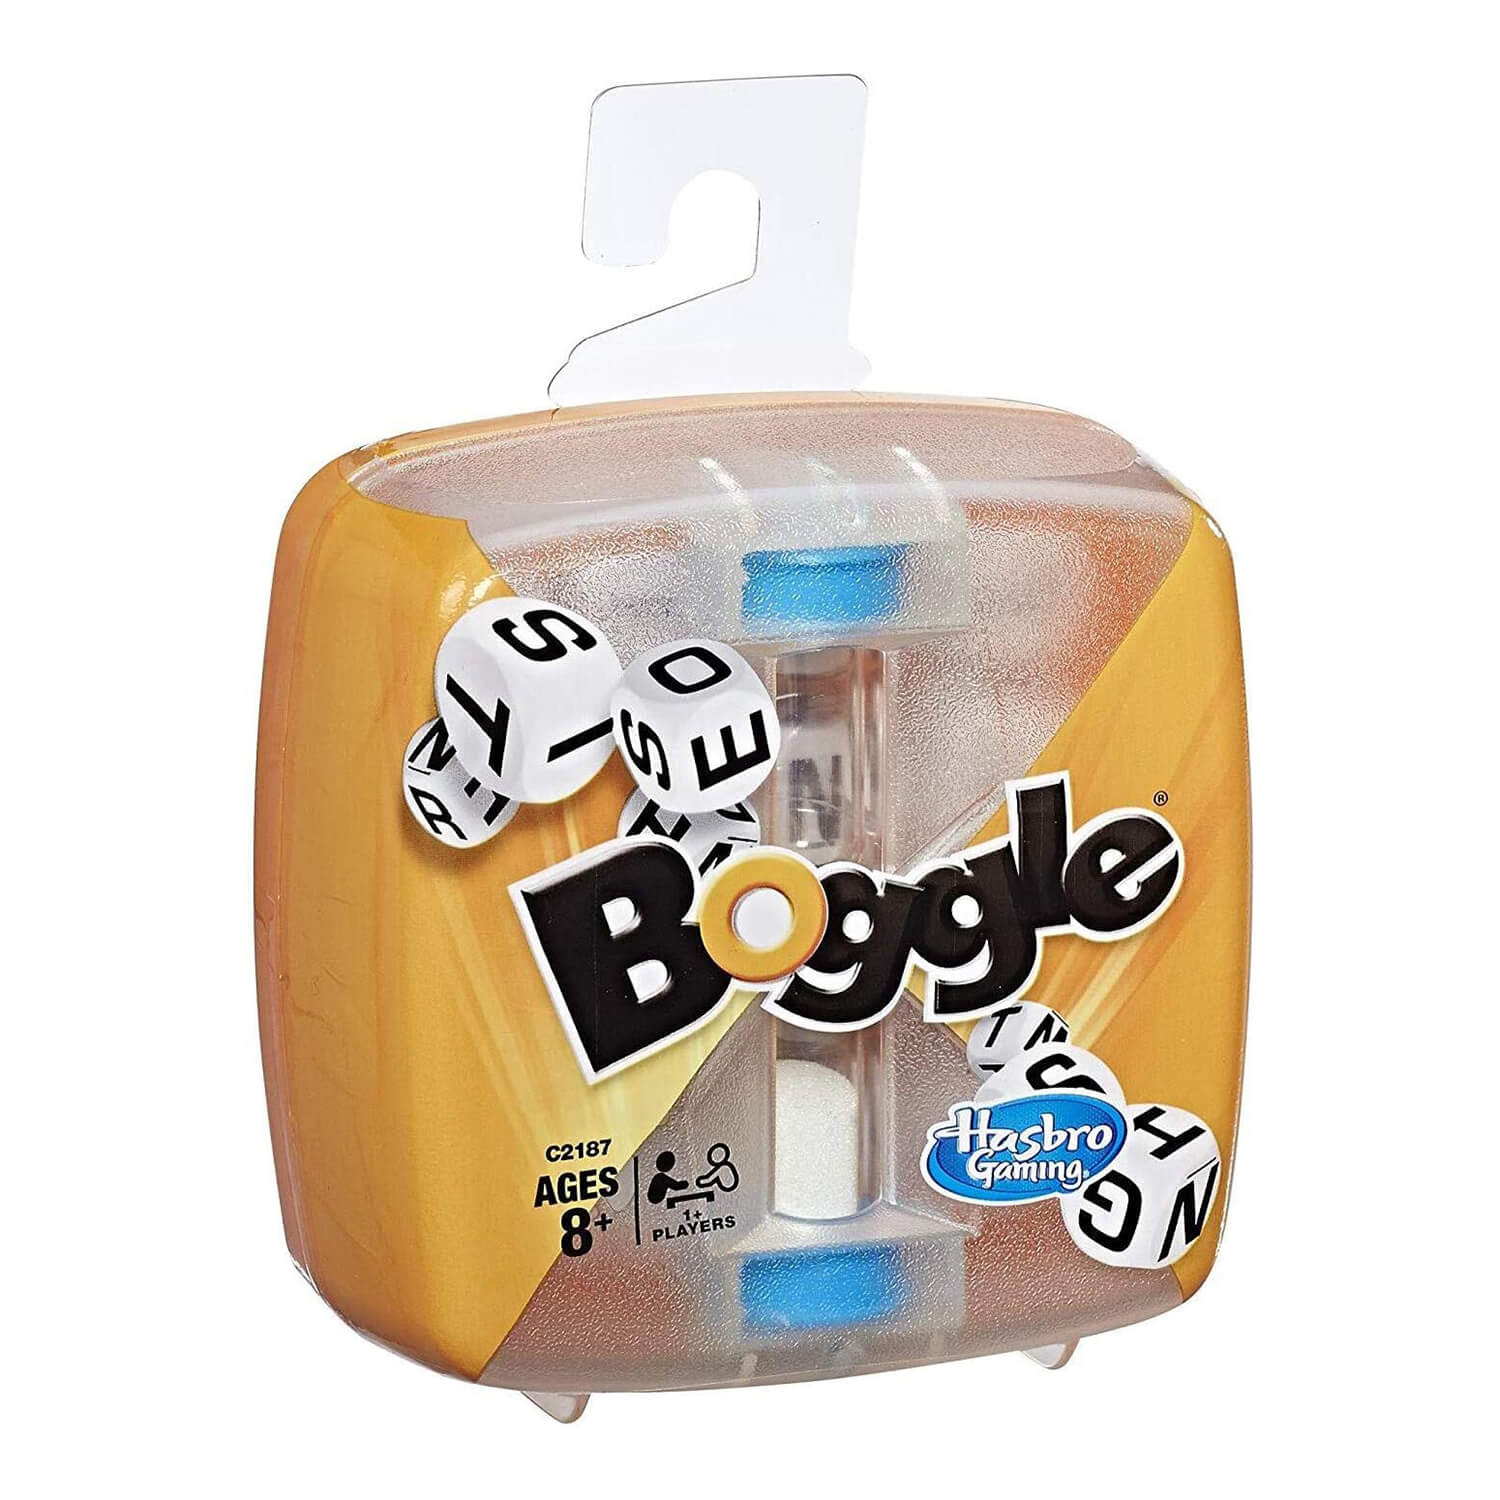 Front view of the Boggle Game package.